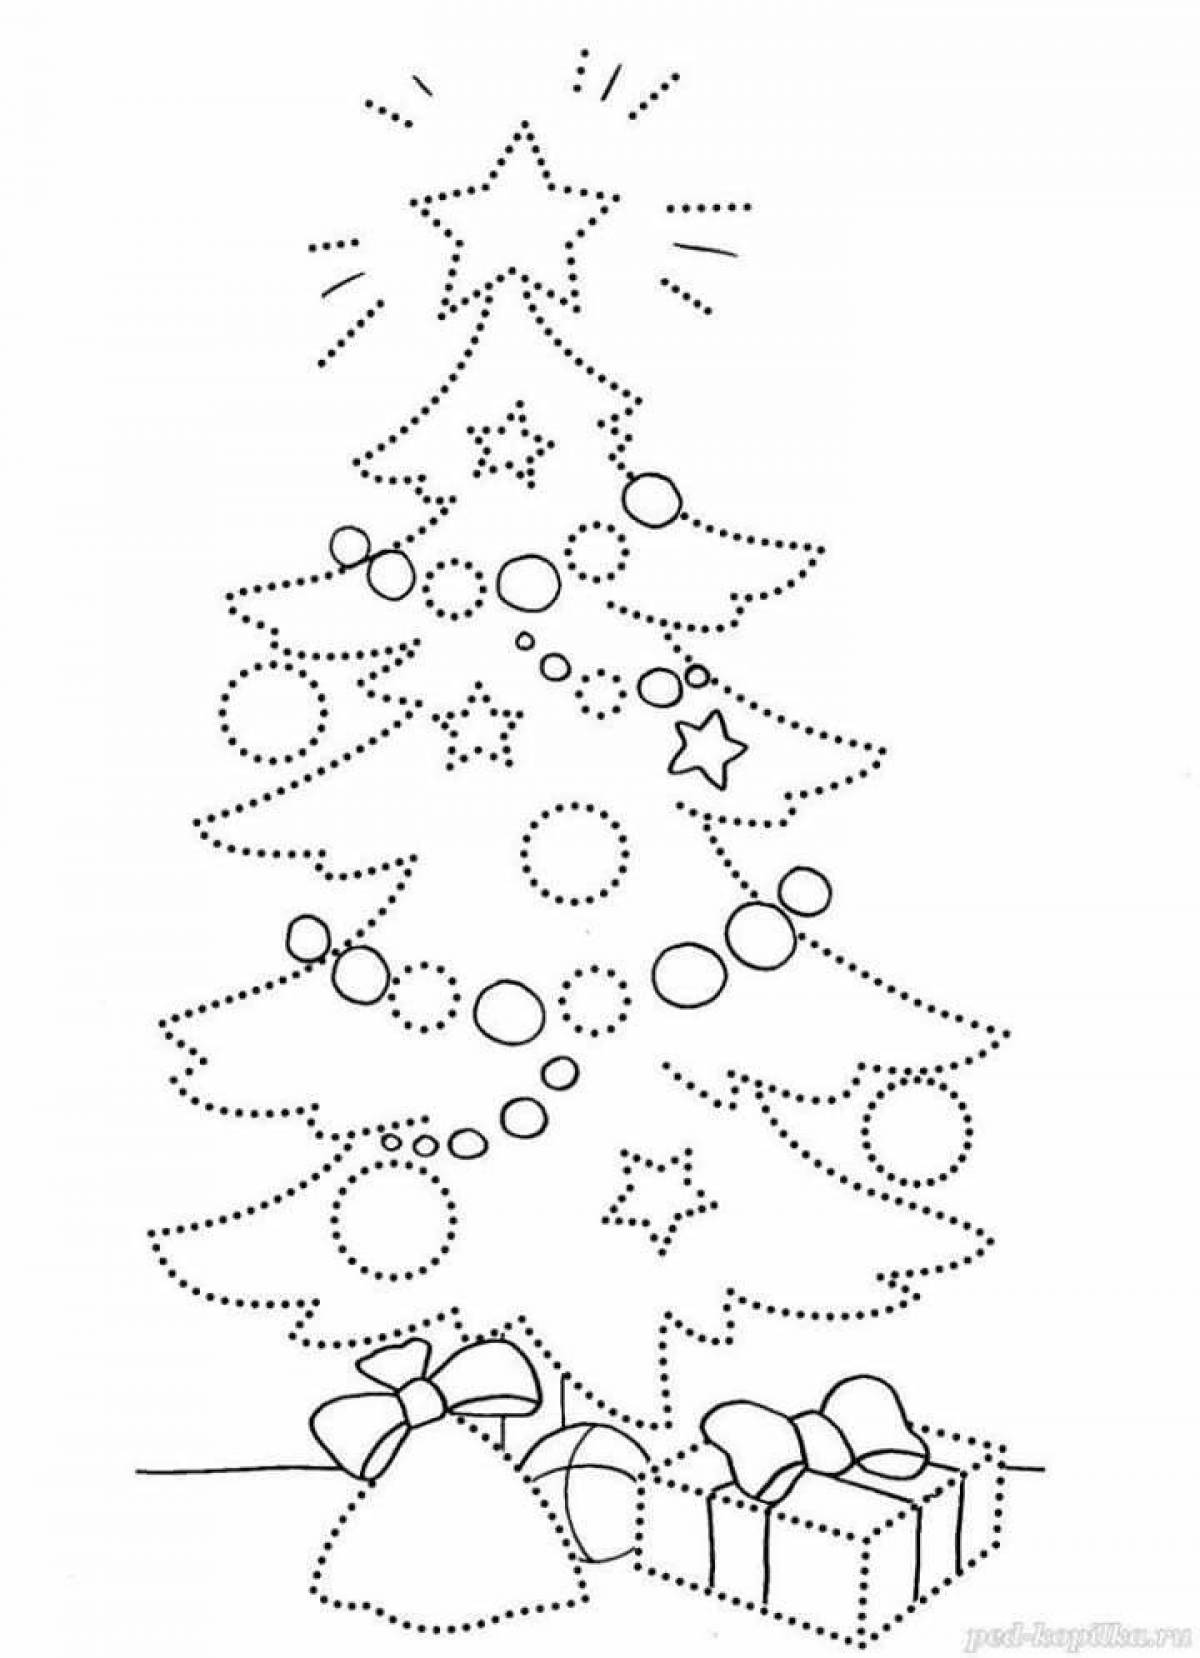 Colorful Christmas tree coloring book for preschoolers 2-3 years old